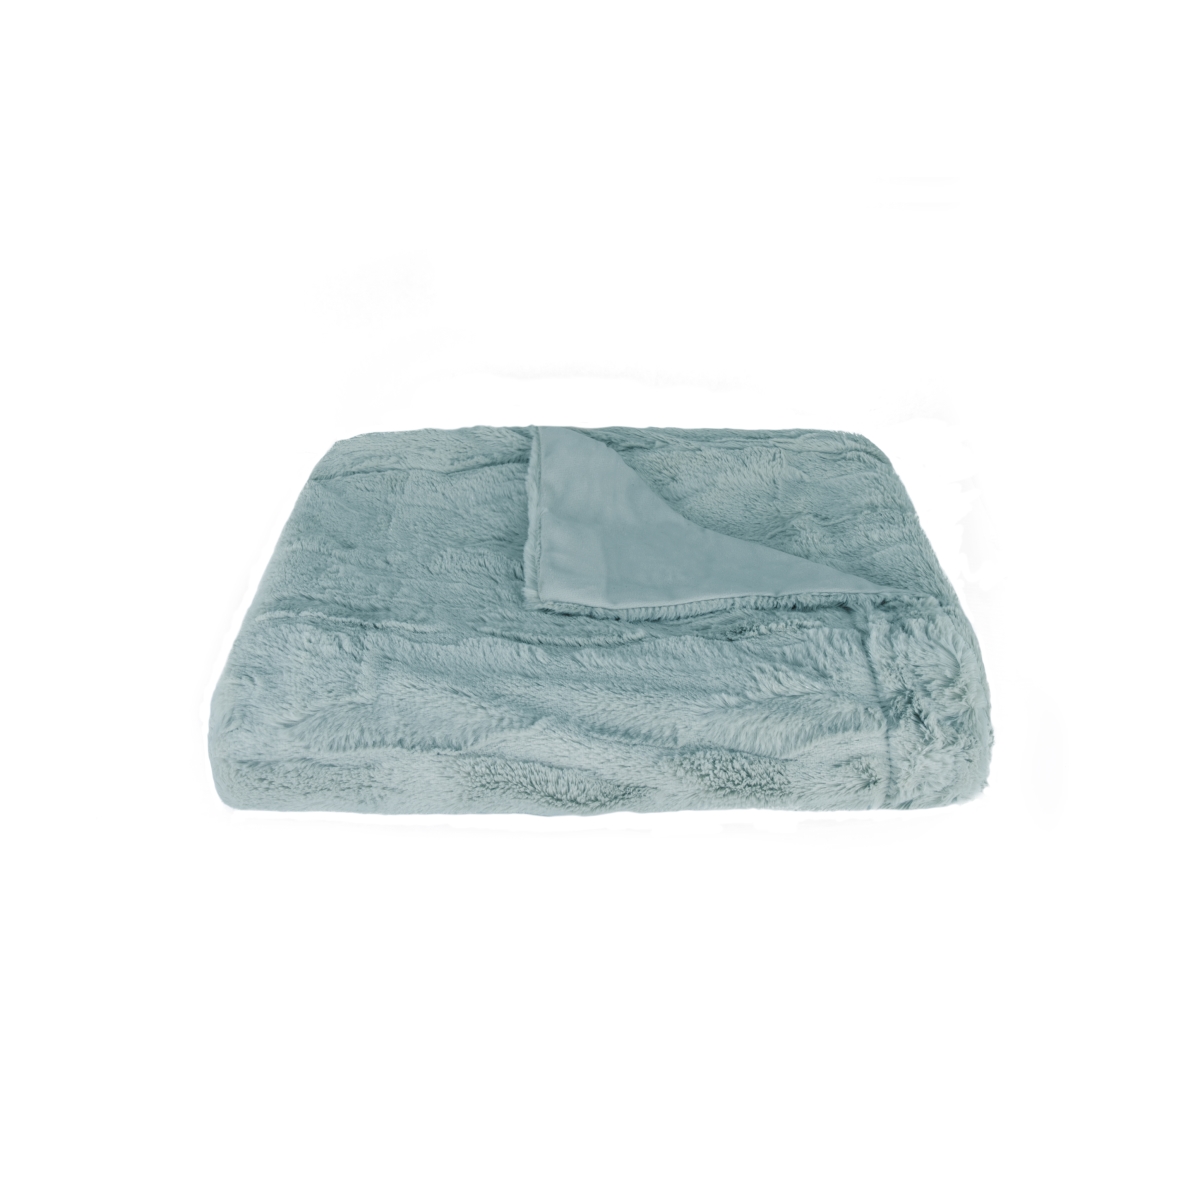 676685049193 50 X 60 In. Throw Blanket - Seagrass